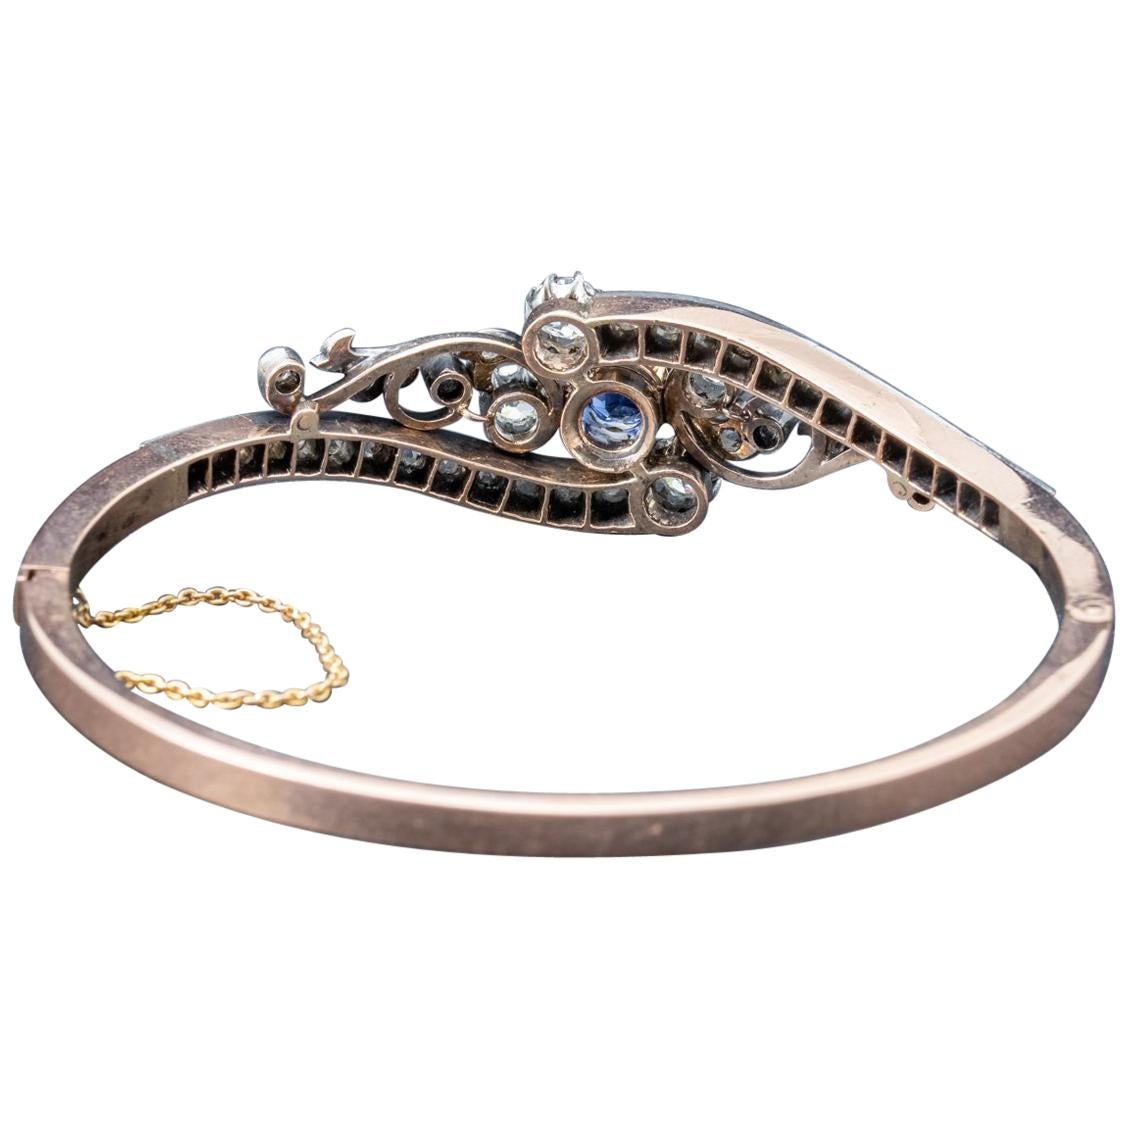 A magnificent antique French bangle from the early 20th century showcasing a stunning front gallery decorated with superb quality old cut Diamonds with a 1.36ct Sapphire in the centre haloed by larger old cuts. The four larger Diamonds are approx.